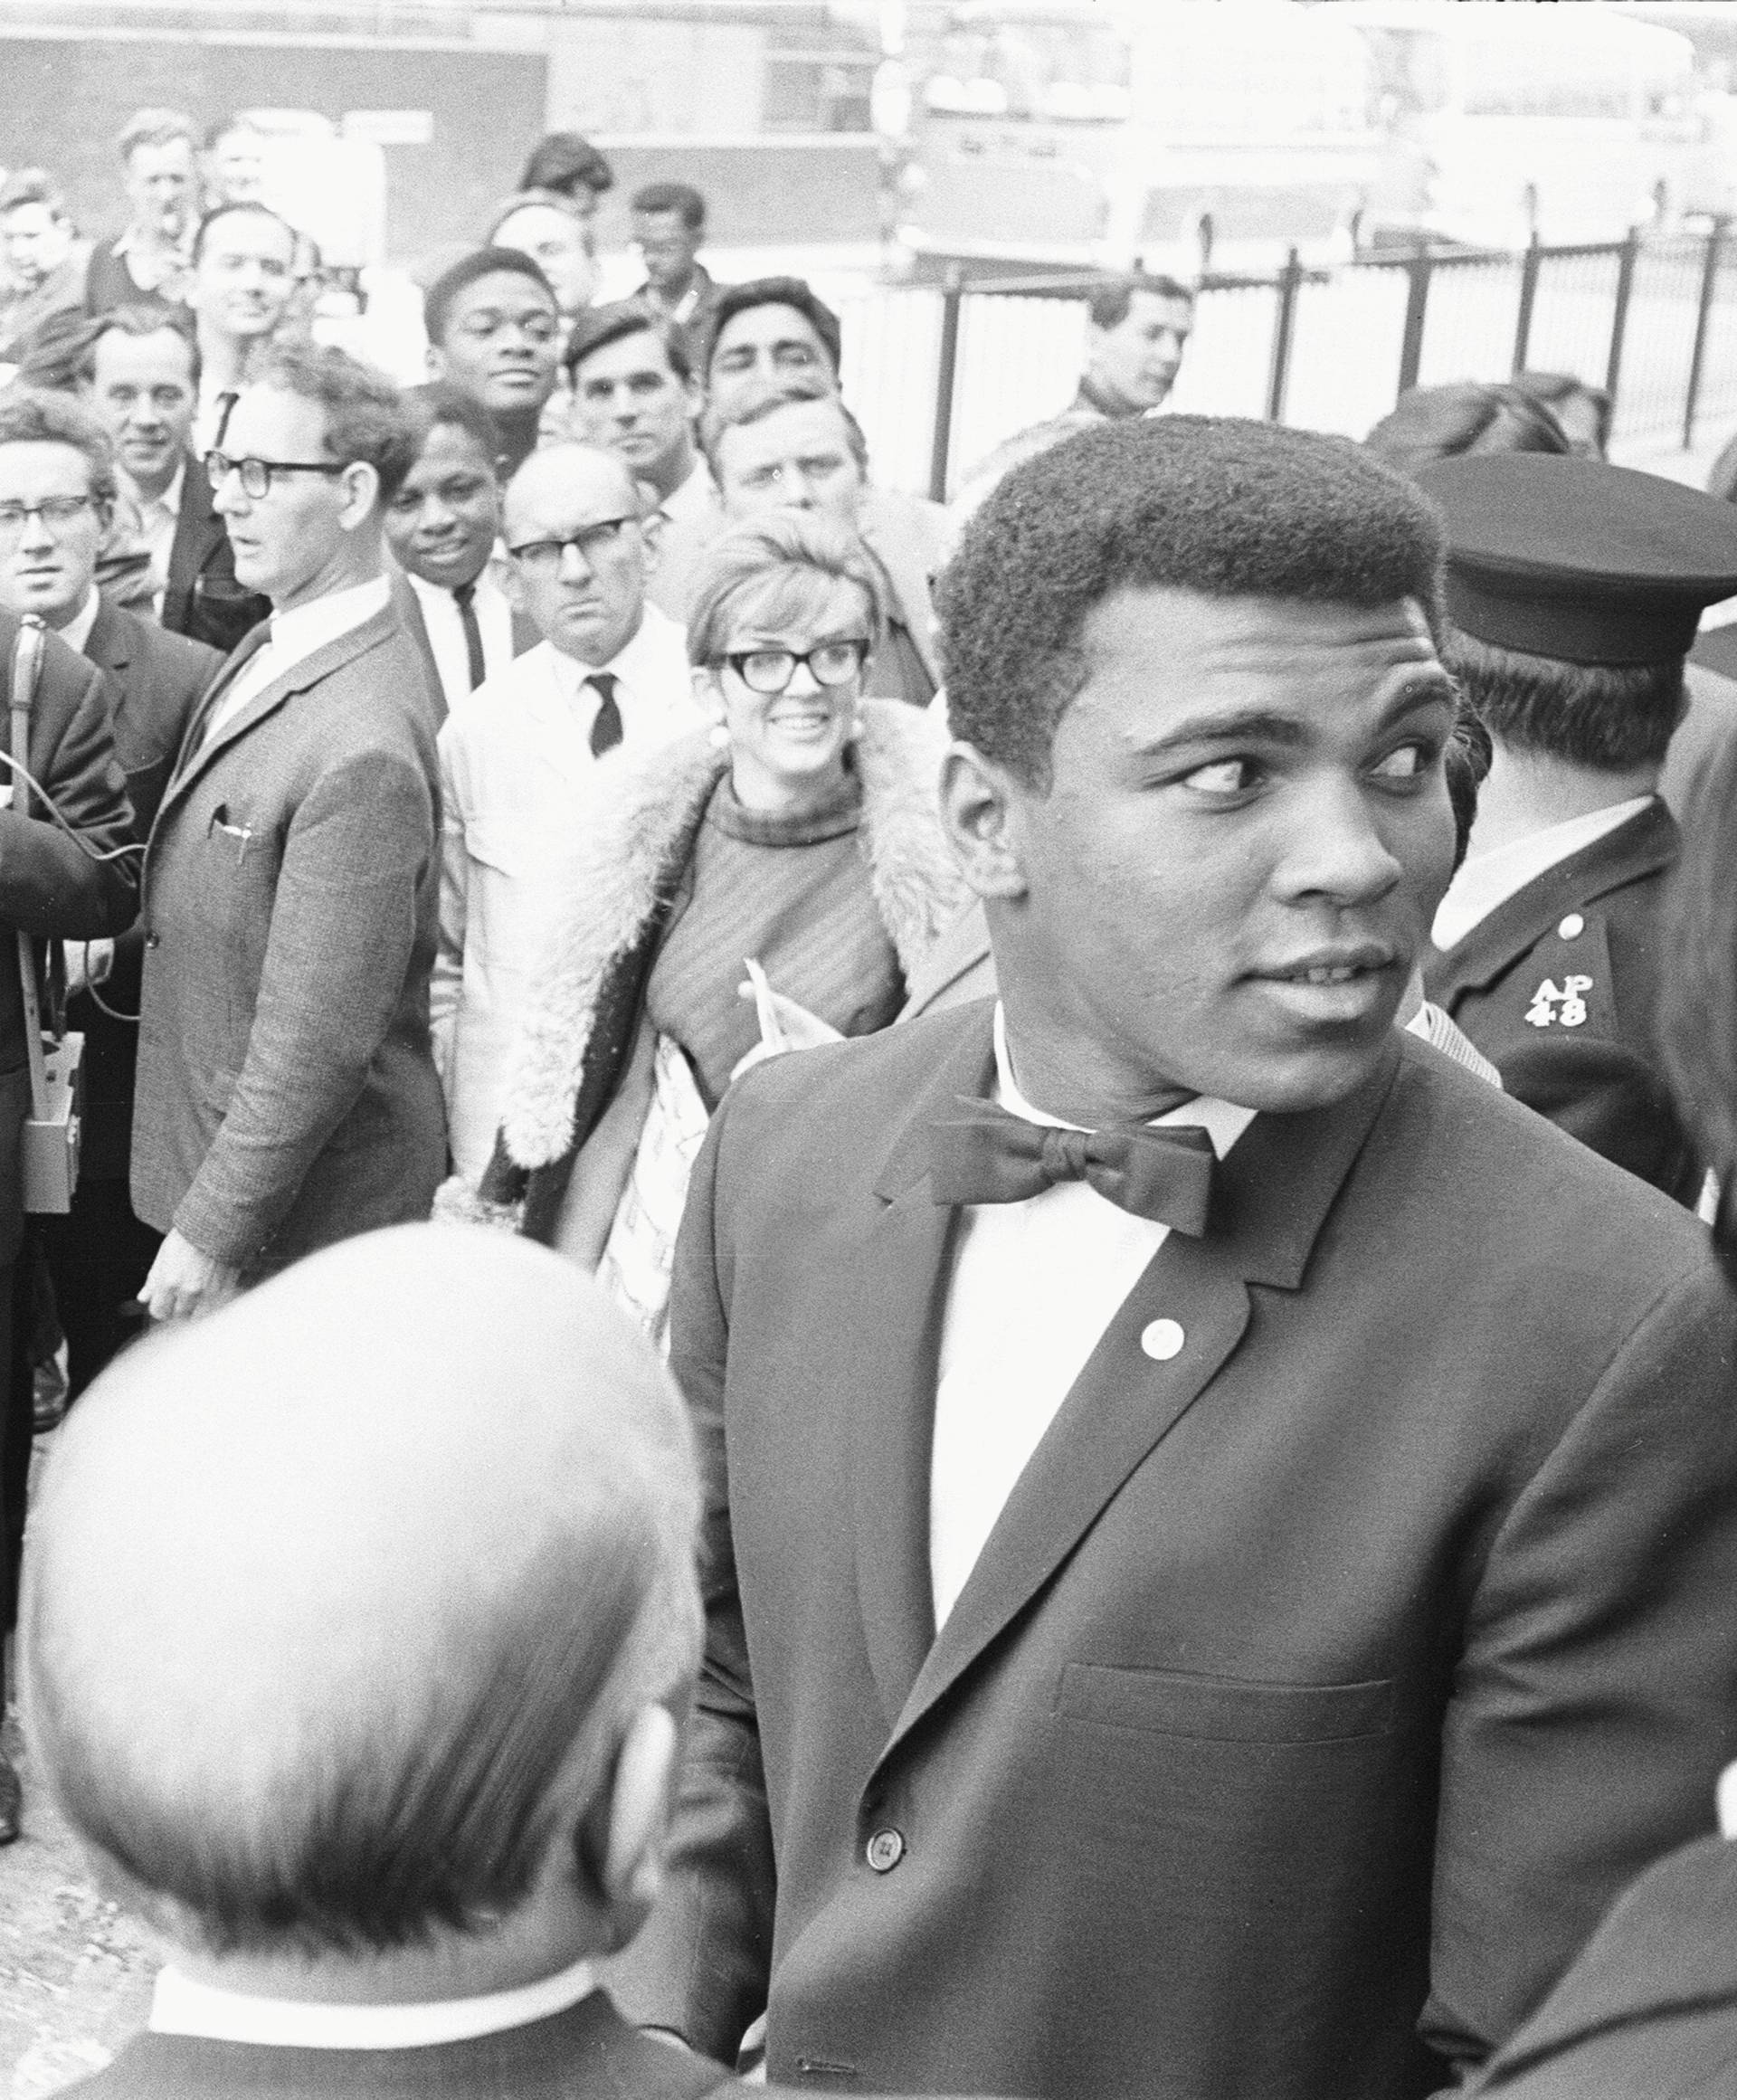  US boxer Muhammad Ali (formerly Cassius Clay) is pictured at his West End Hotel during his stay in London, Britain to fight Henry Cooper